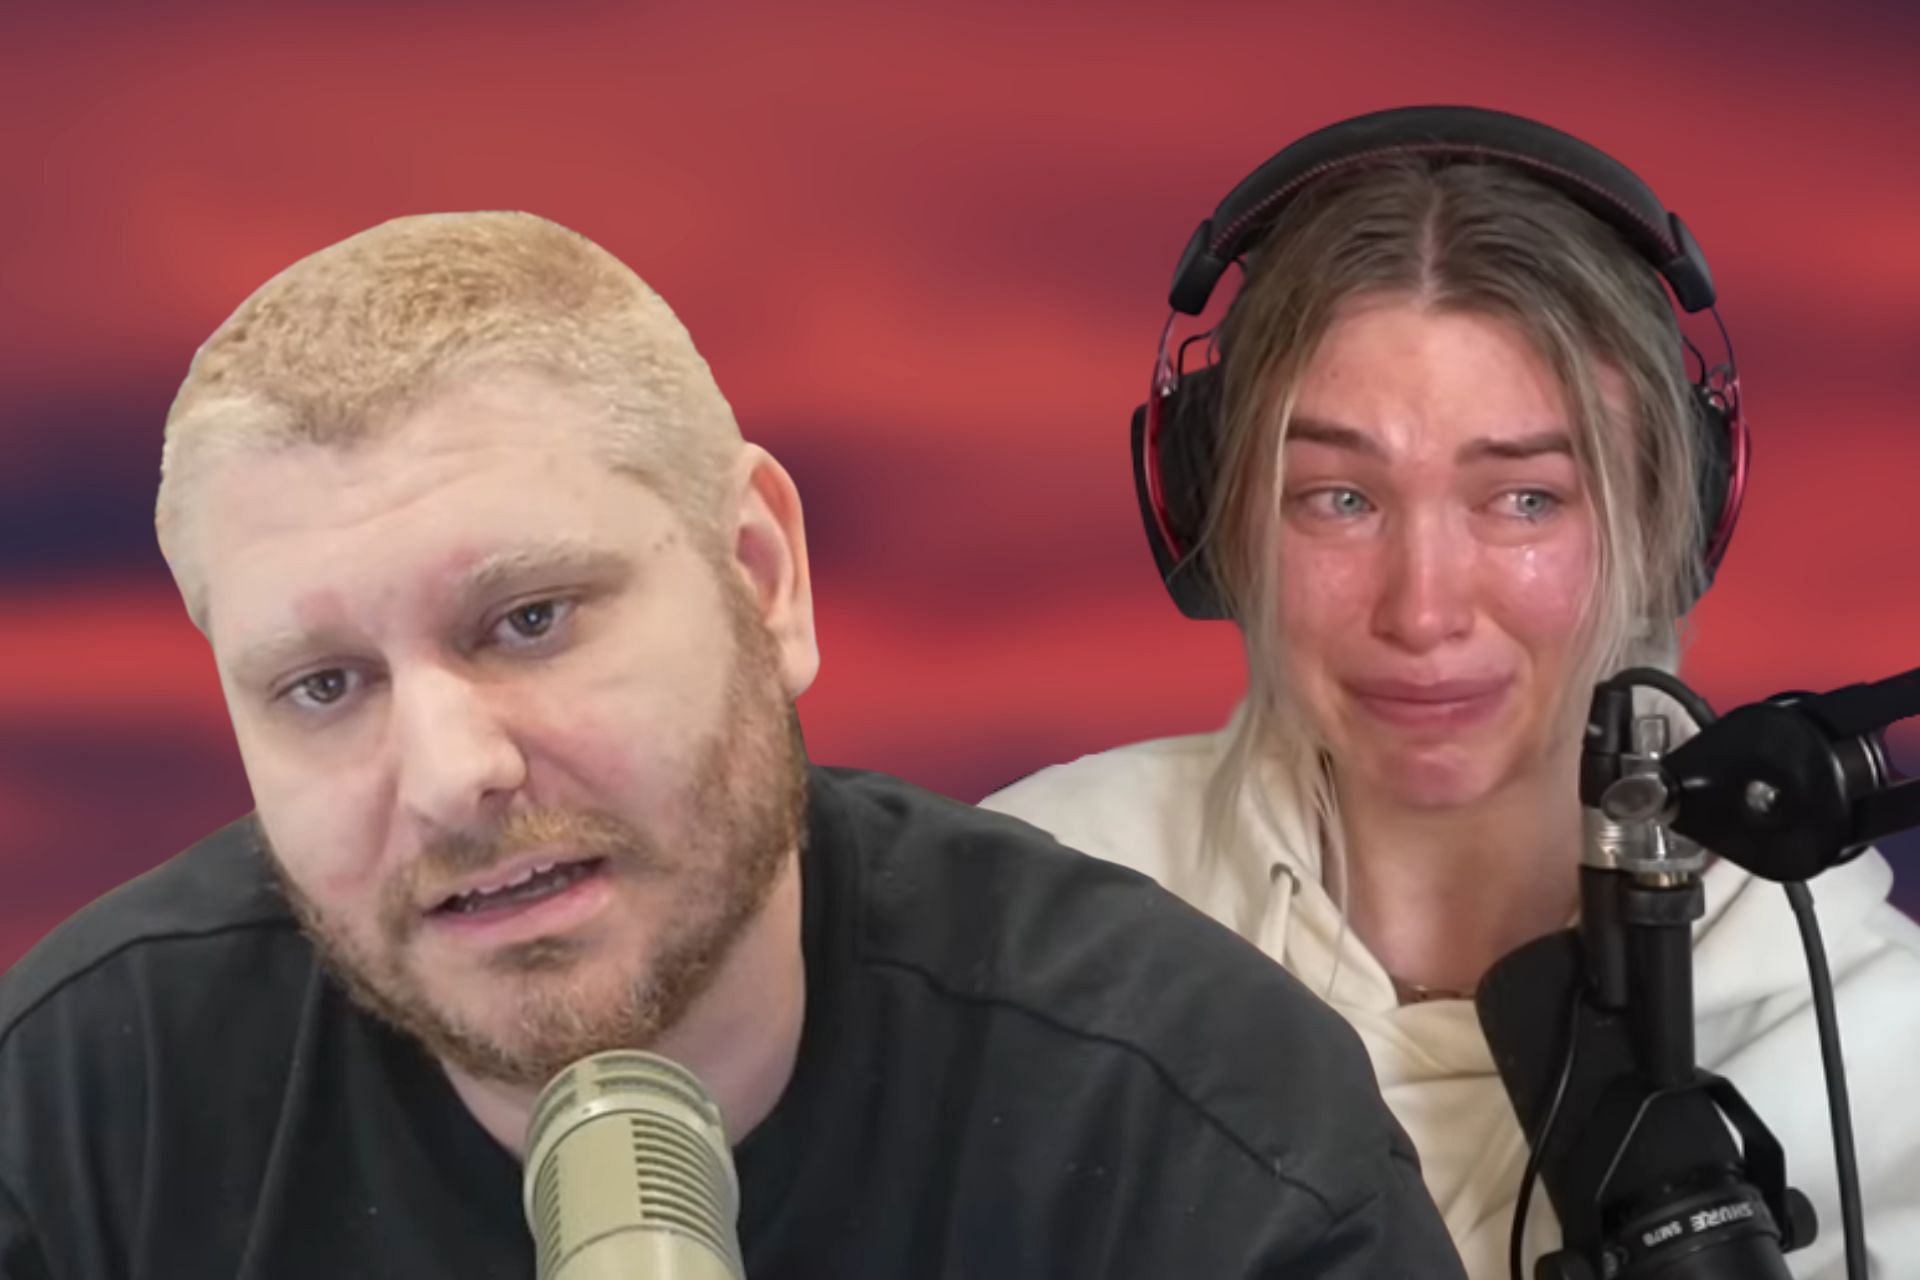 Ethan Klein issues apology over insensitive gesture (Image via Sportskeeda)